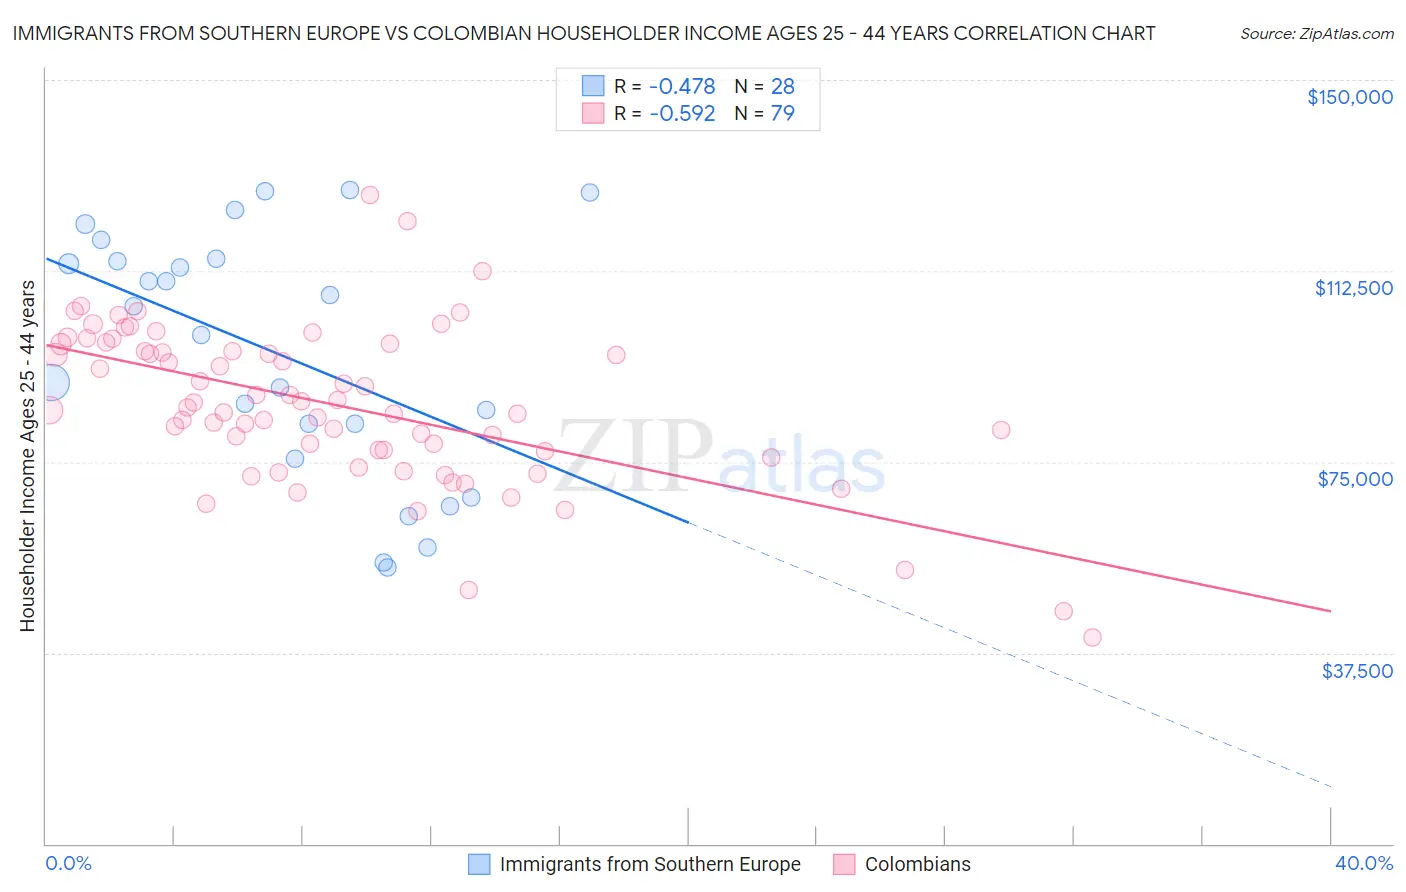 Immigrants from Southern Europe vs Colombian Householder Income Ages 25 - 44 years